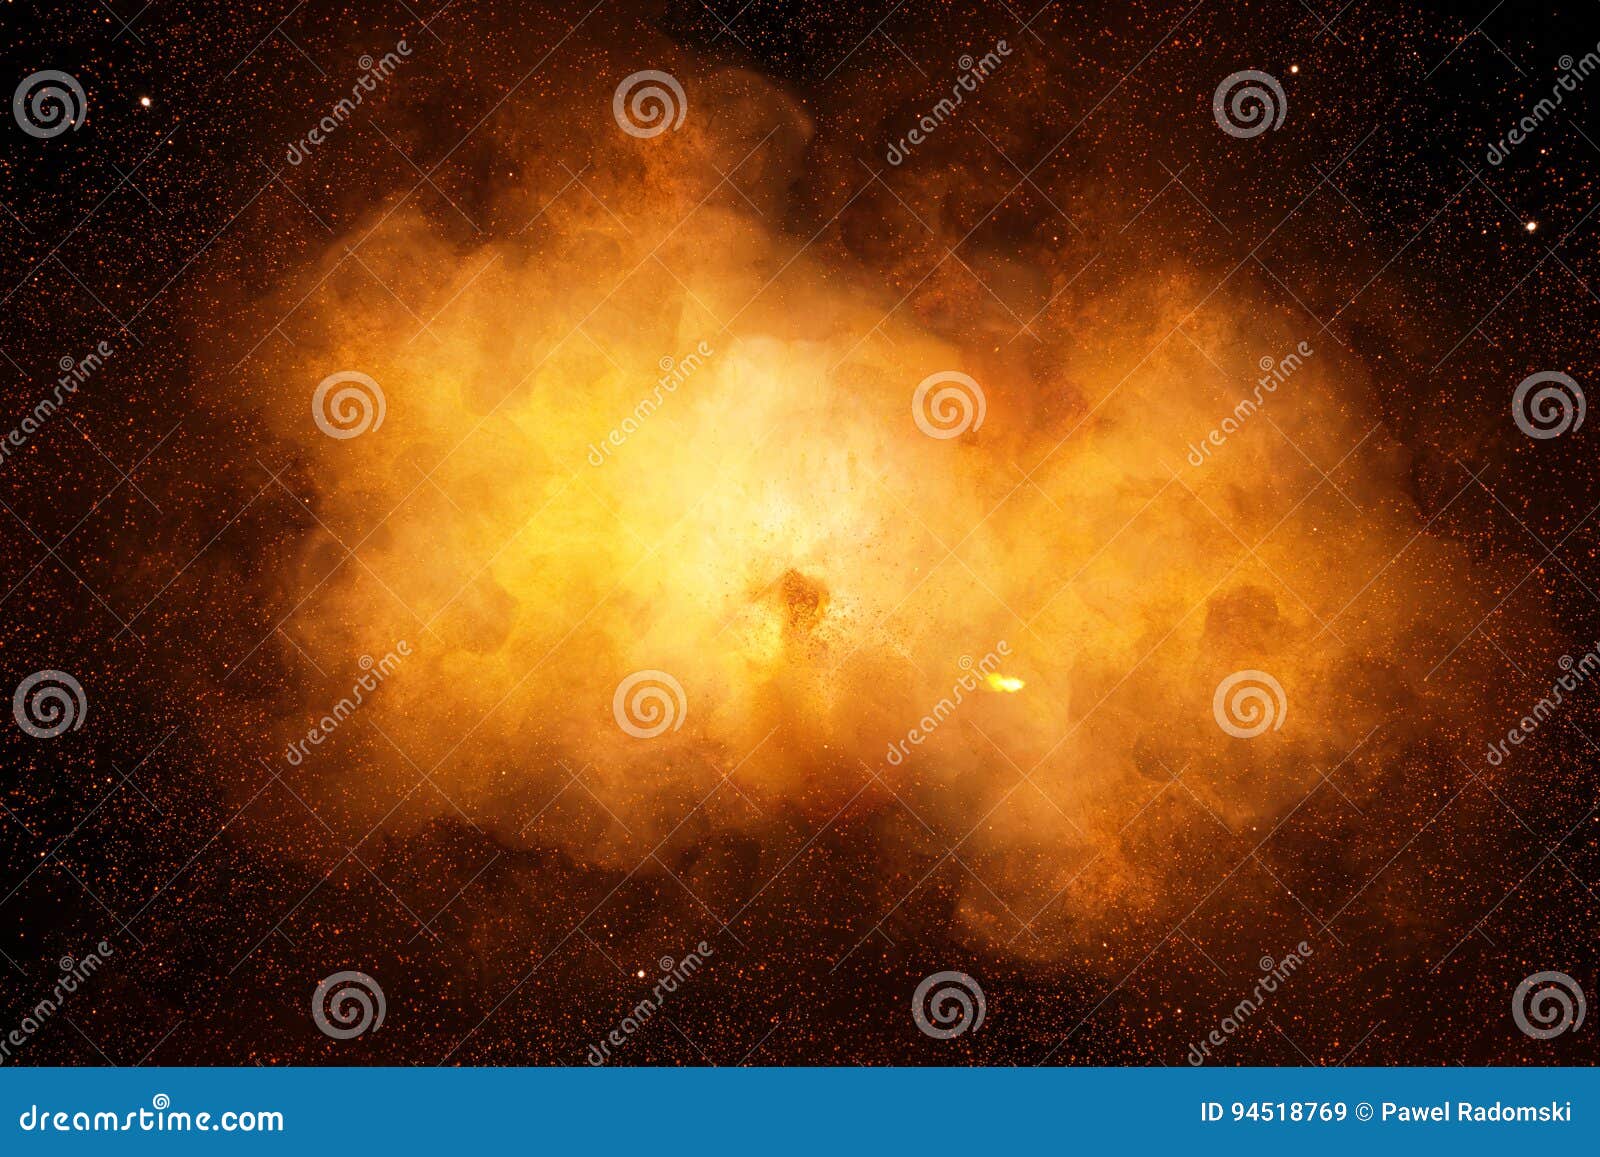 huge, extremely hot explosion with sparks and hot smoke, against black background